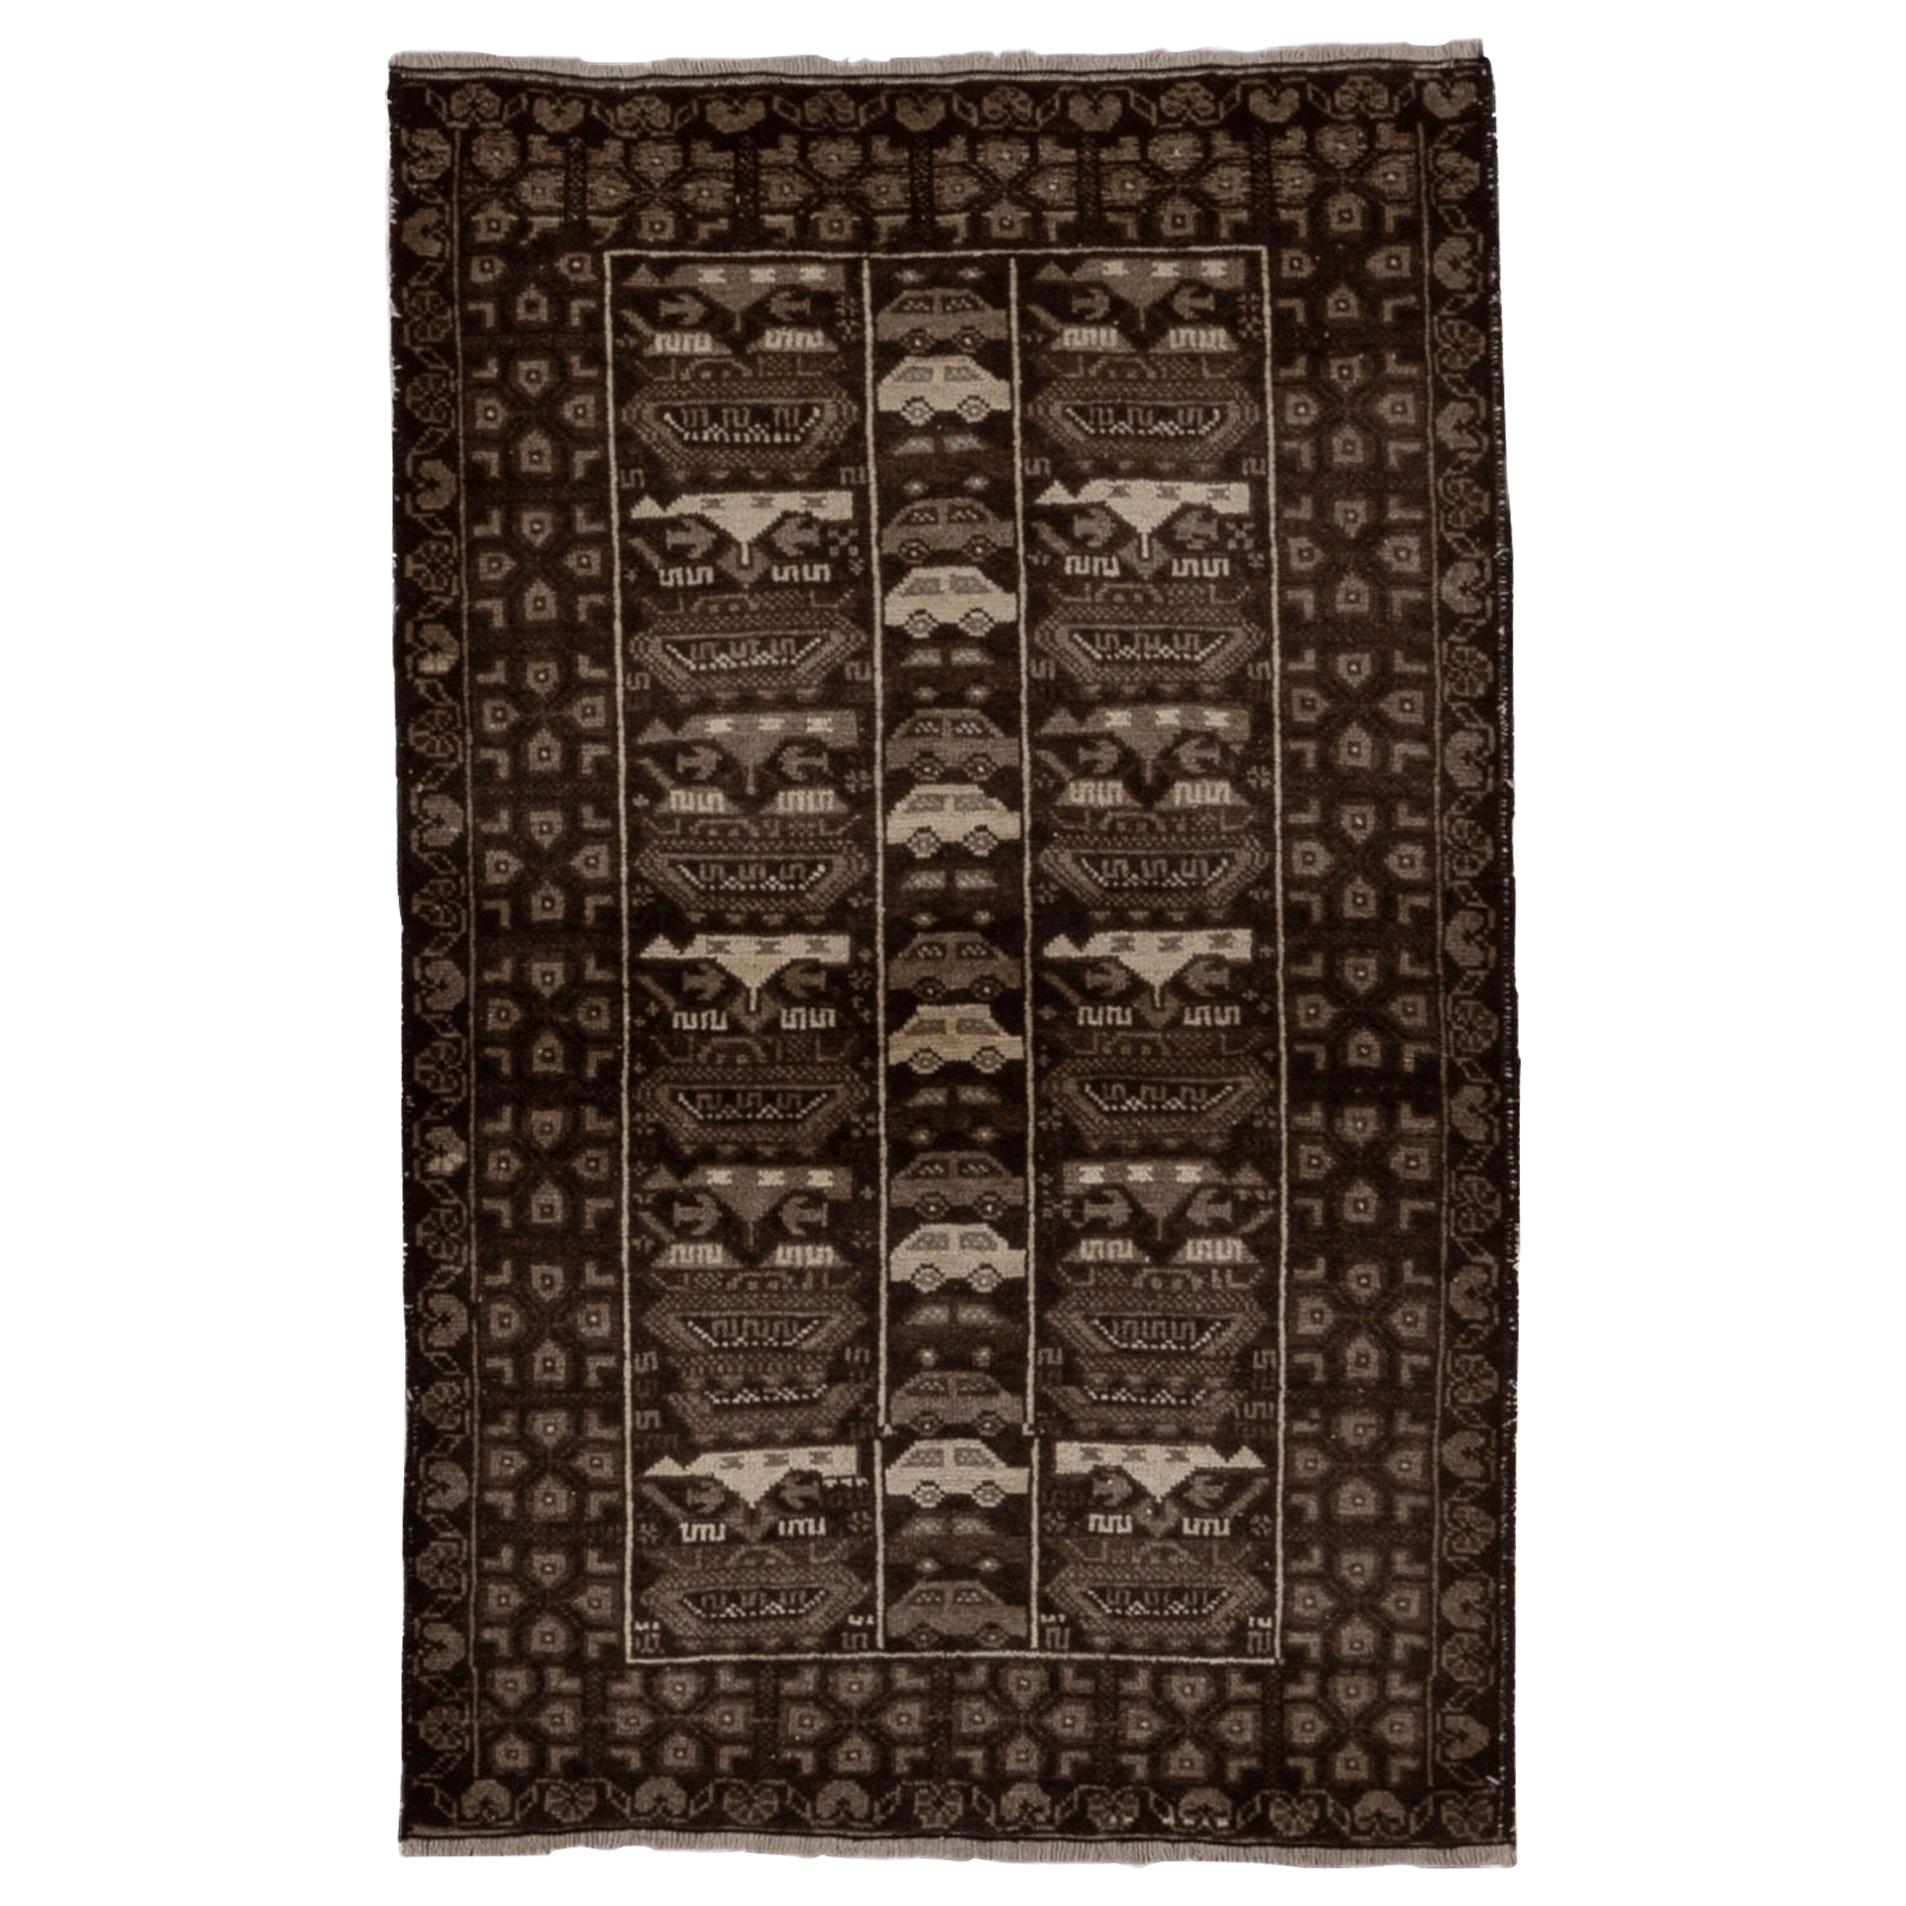 Tribal Belouch Scatter Rug, Dark Espresso Brown Field, Gray and White Accents For Sale